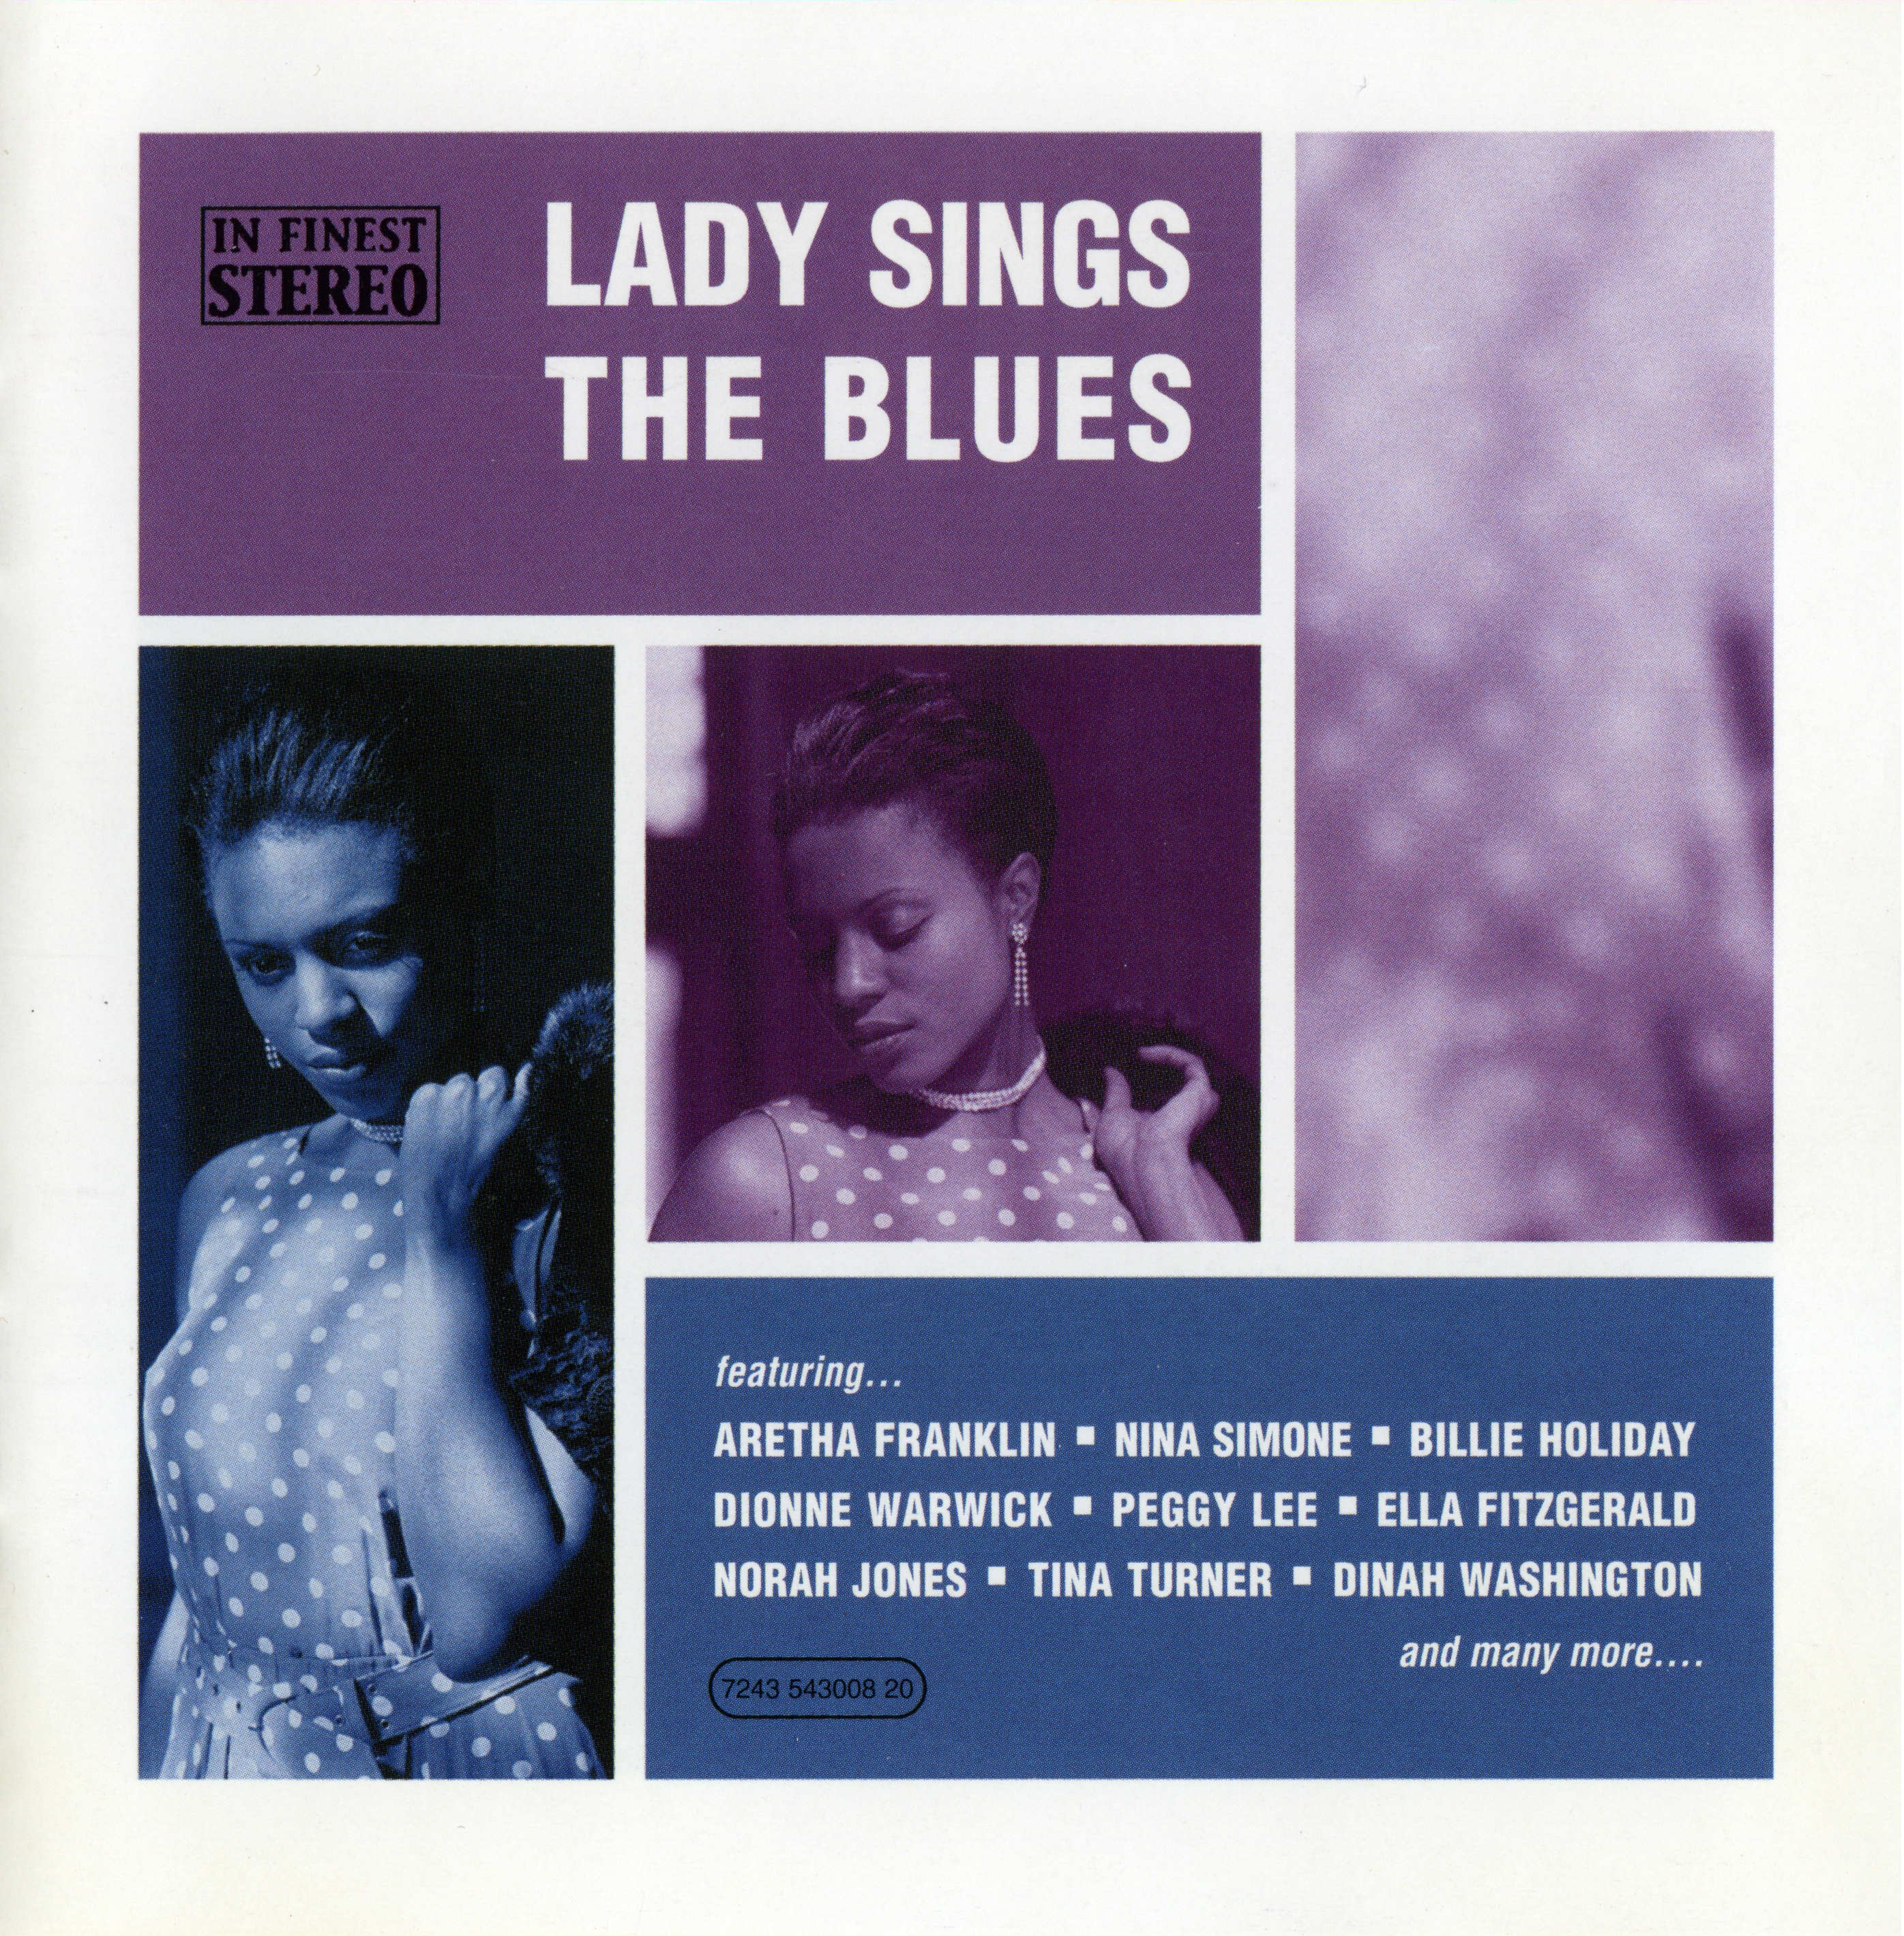 Singing the blues. Lady Sings the Blues. Lady Sings the Blues album. Lady Sings the Blues Vinyl. Обложка для двд Lady Sings the Blues 1972.